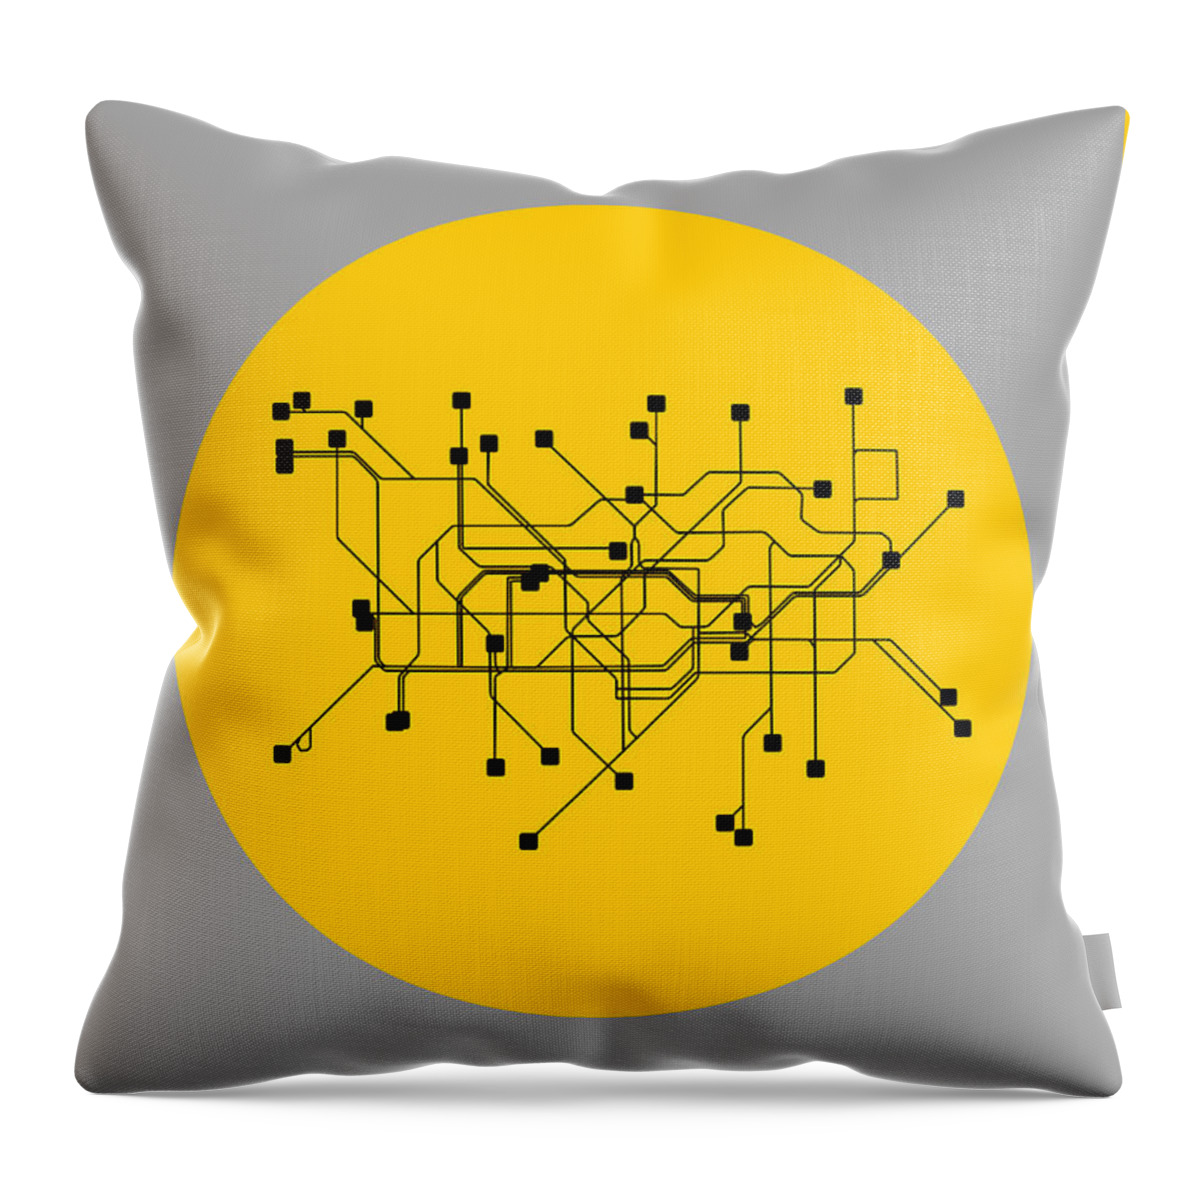 Unique Collection Of Minimalist Subway Maps. American Cities Throw Pillow featuring the photograph London Yellow Subway Map by Naxart Studio